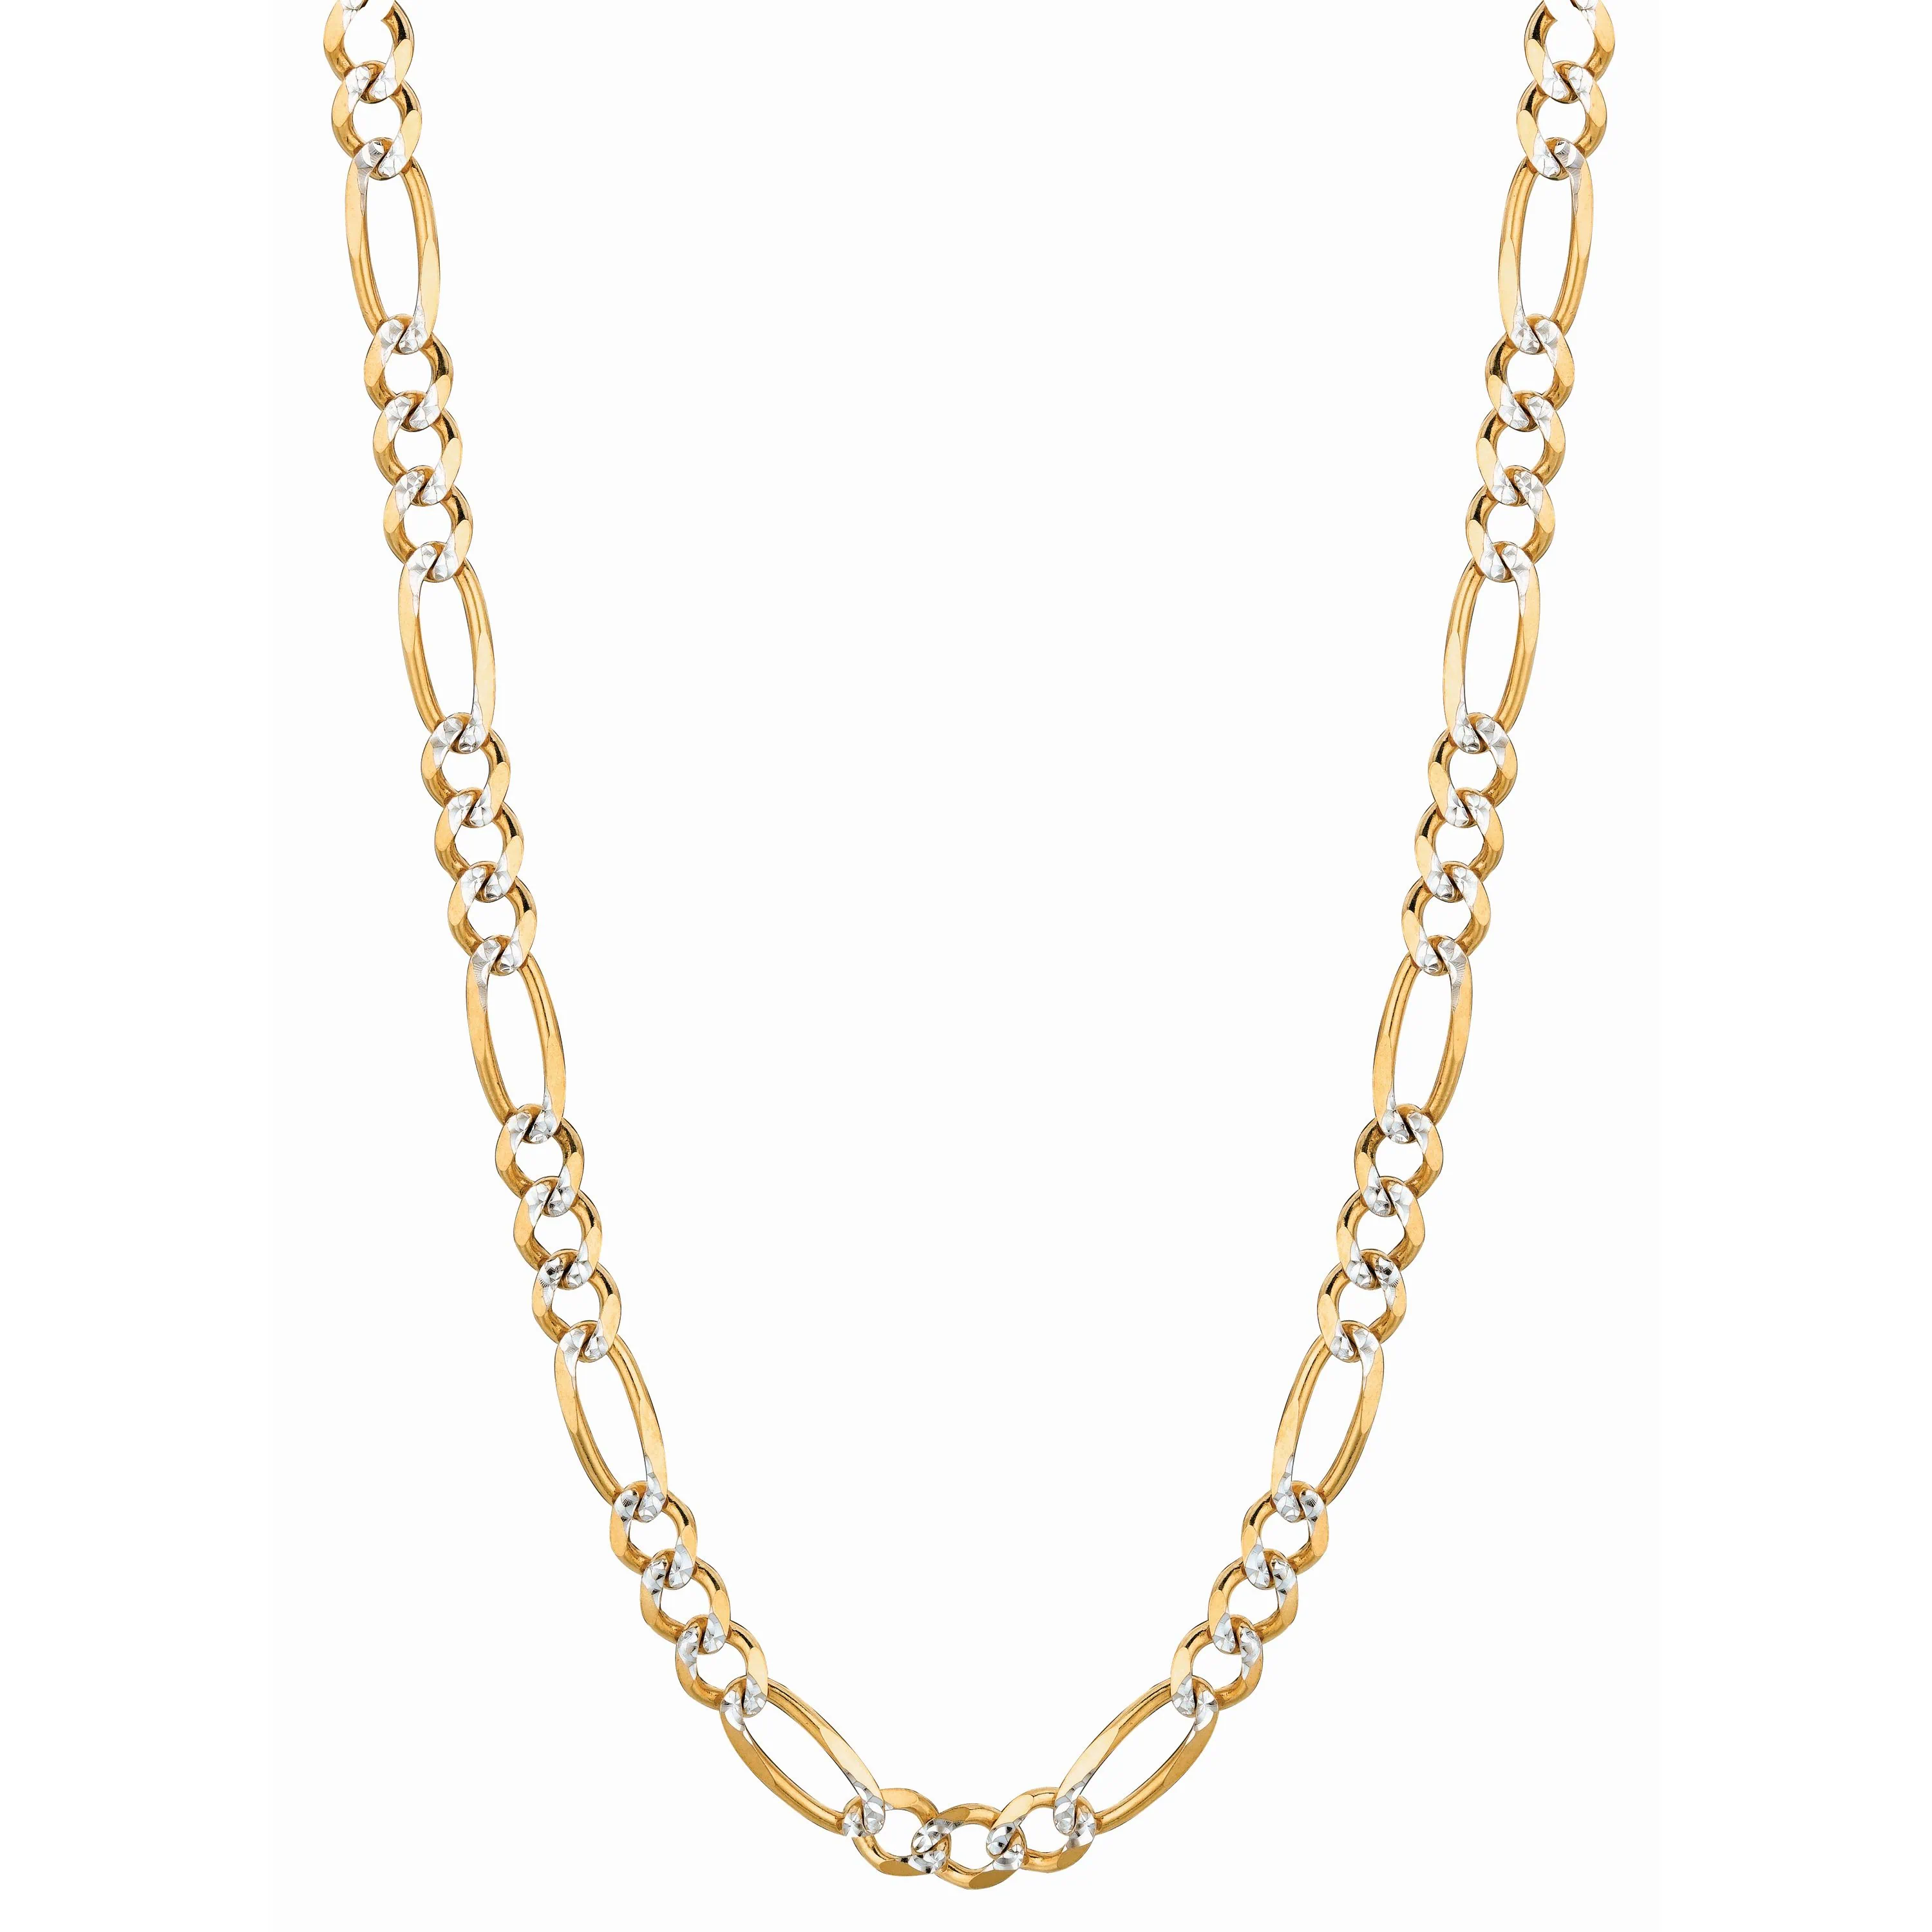 14K Gold 5.8mm White Pave Figaro Chain